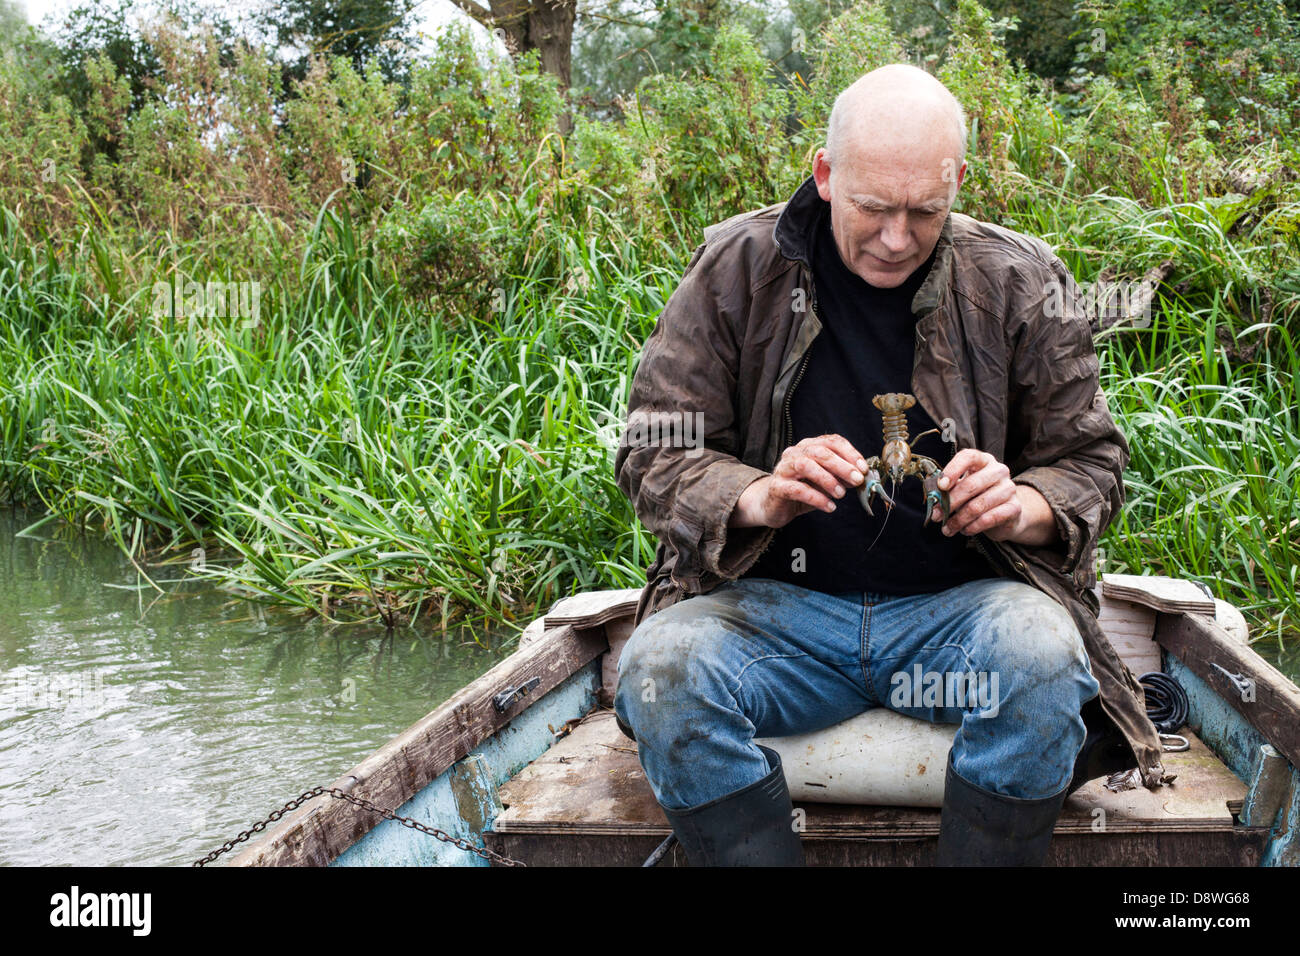 Bob Ring, 57, known as Crayfish Bob trapping American crayfish in the River Thames at Abingdon Lock, Oxfordshire. Stock Photo